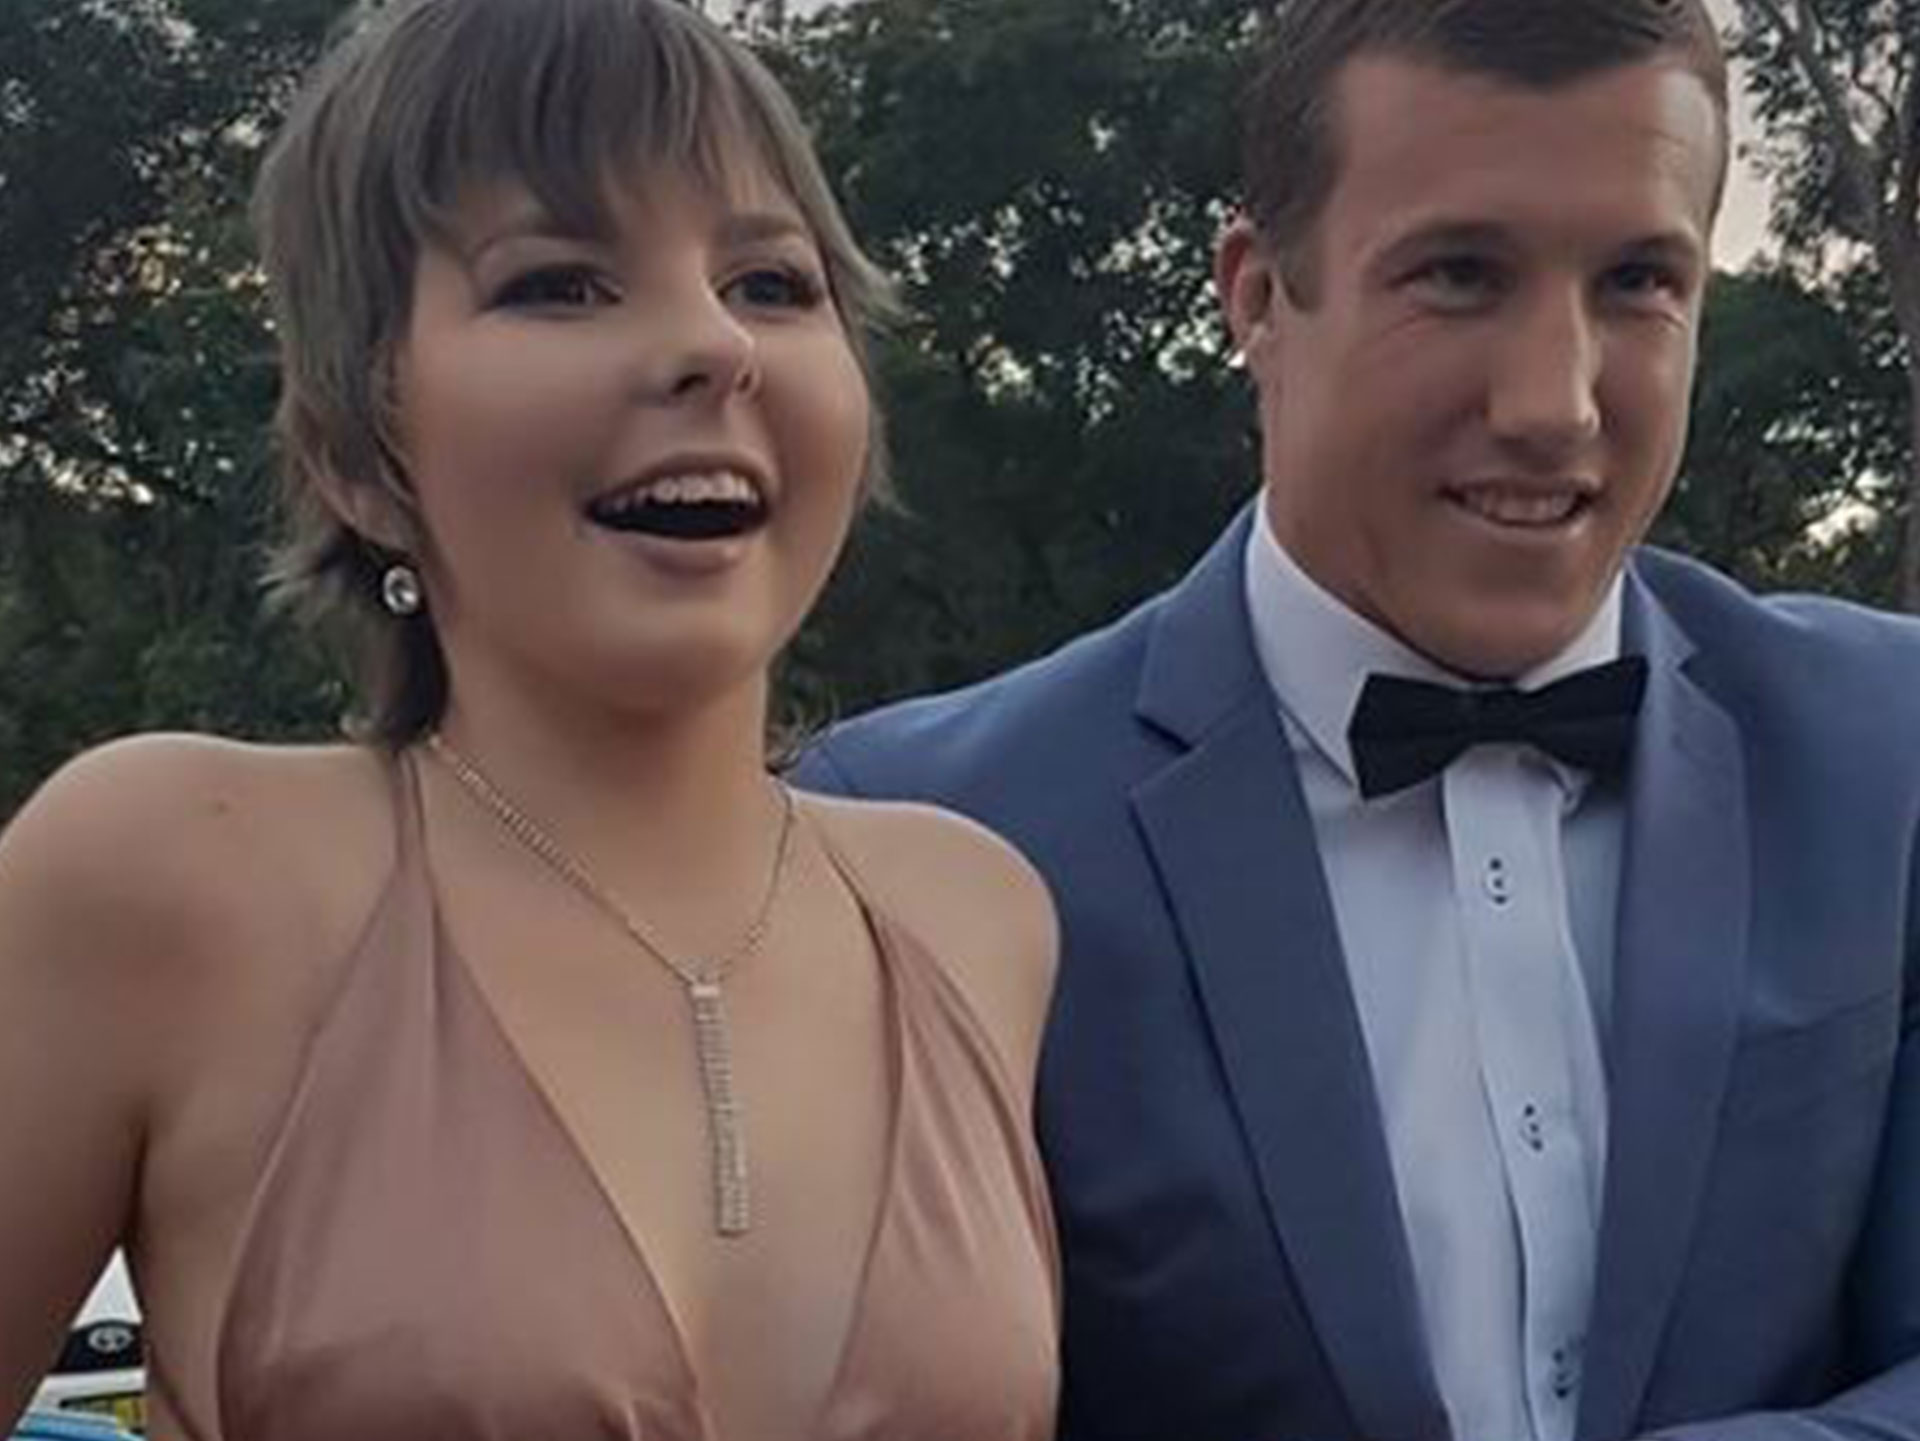 NRL player melts heart by escorting a terminally ill teenager to her formal